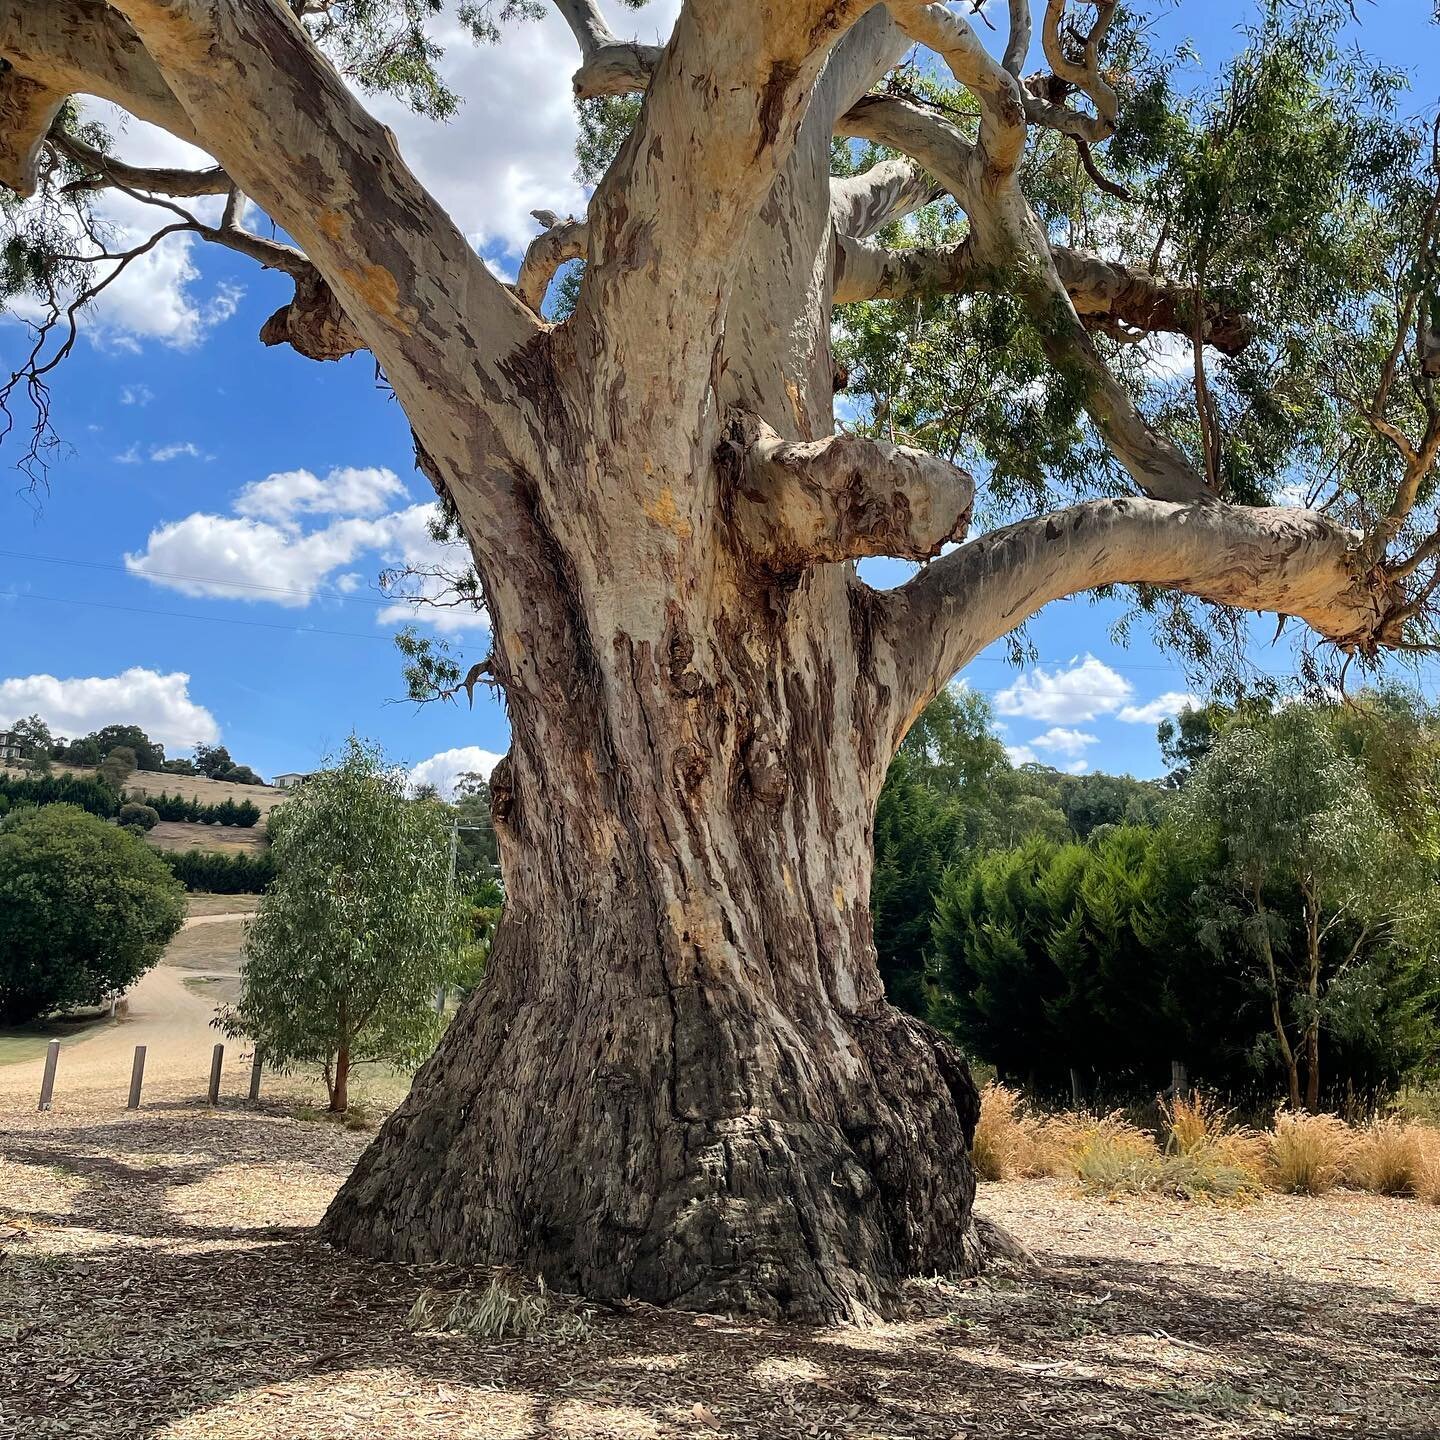 We were in Guildford for a site visit yesterday and took some time out to appreciate their magnificent &lsquo;Big Tree&rsquo;. #eucalyptuscamaldulensis #riverredgum #djadjawurrungcountry